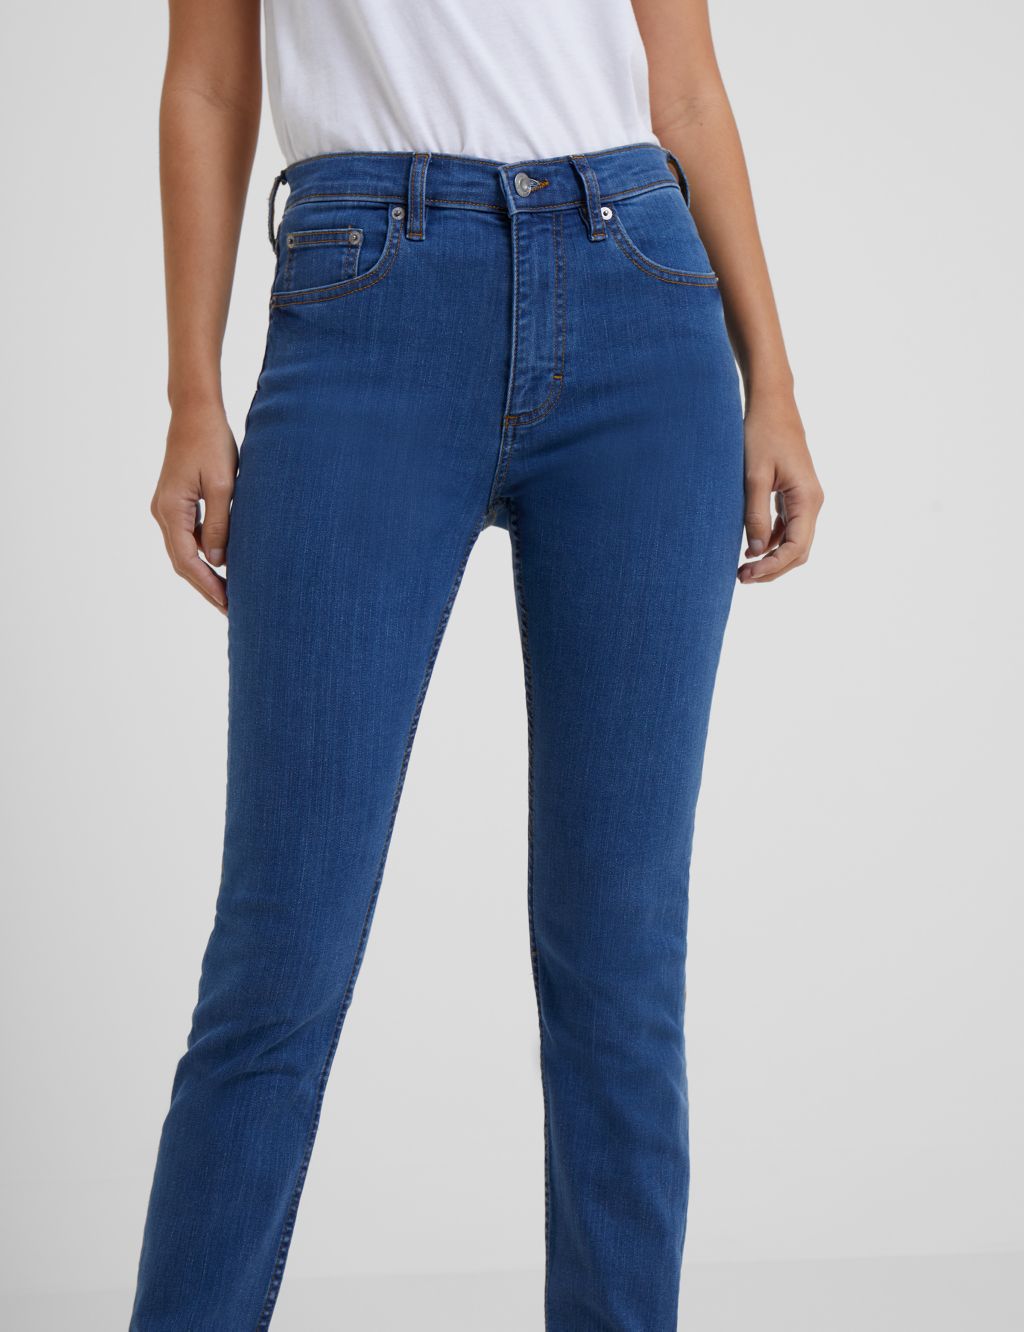 High Waisted Skinny Ankle Grazer Jeans image 3